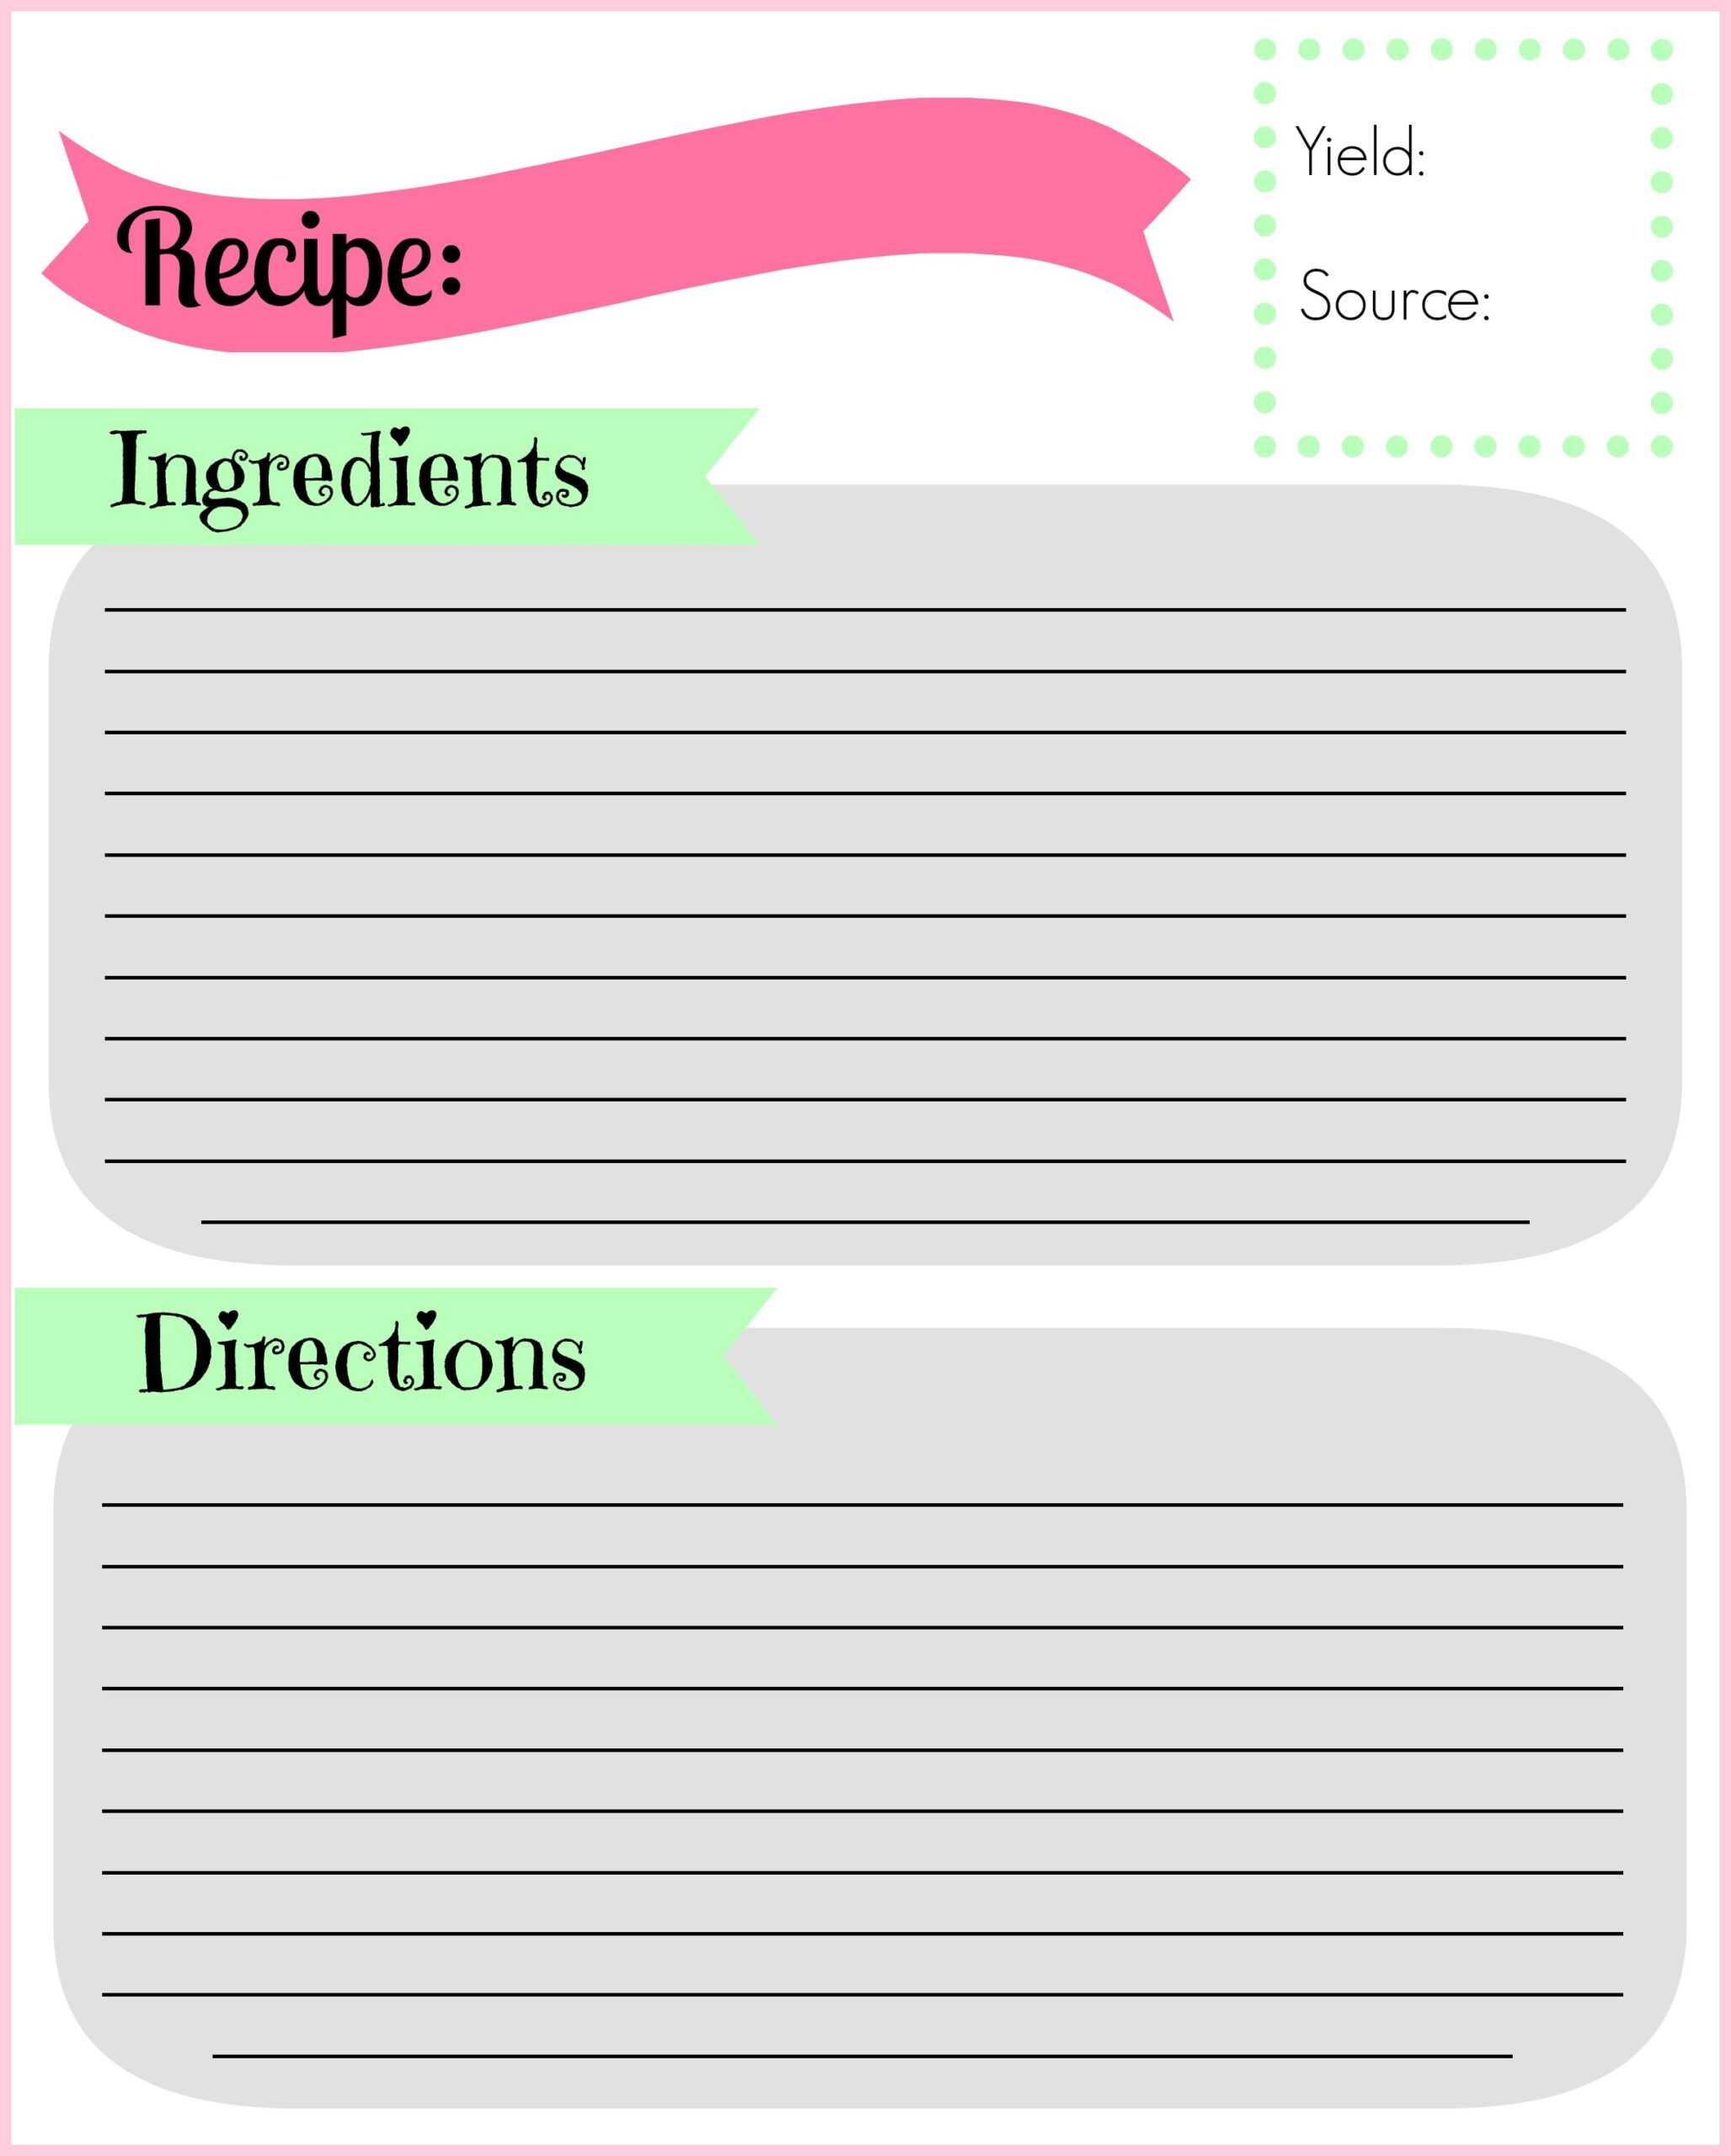 004 Cookbook Template Ideas Free Full Page Recipe For Awful Throughout Full Page Recipe Template For Word